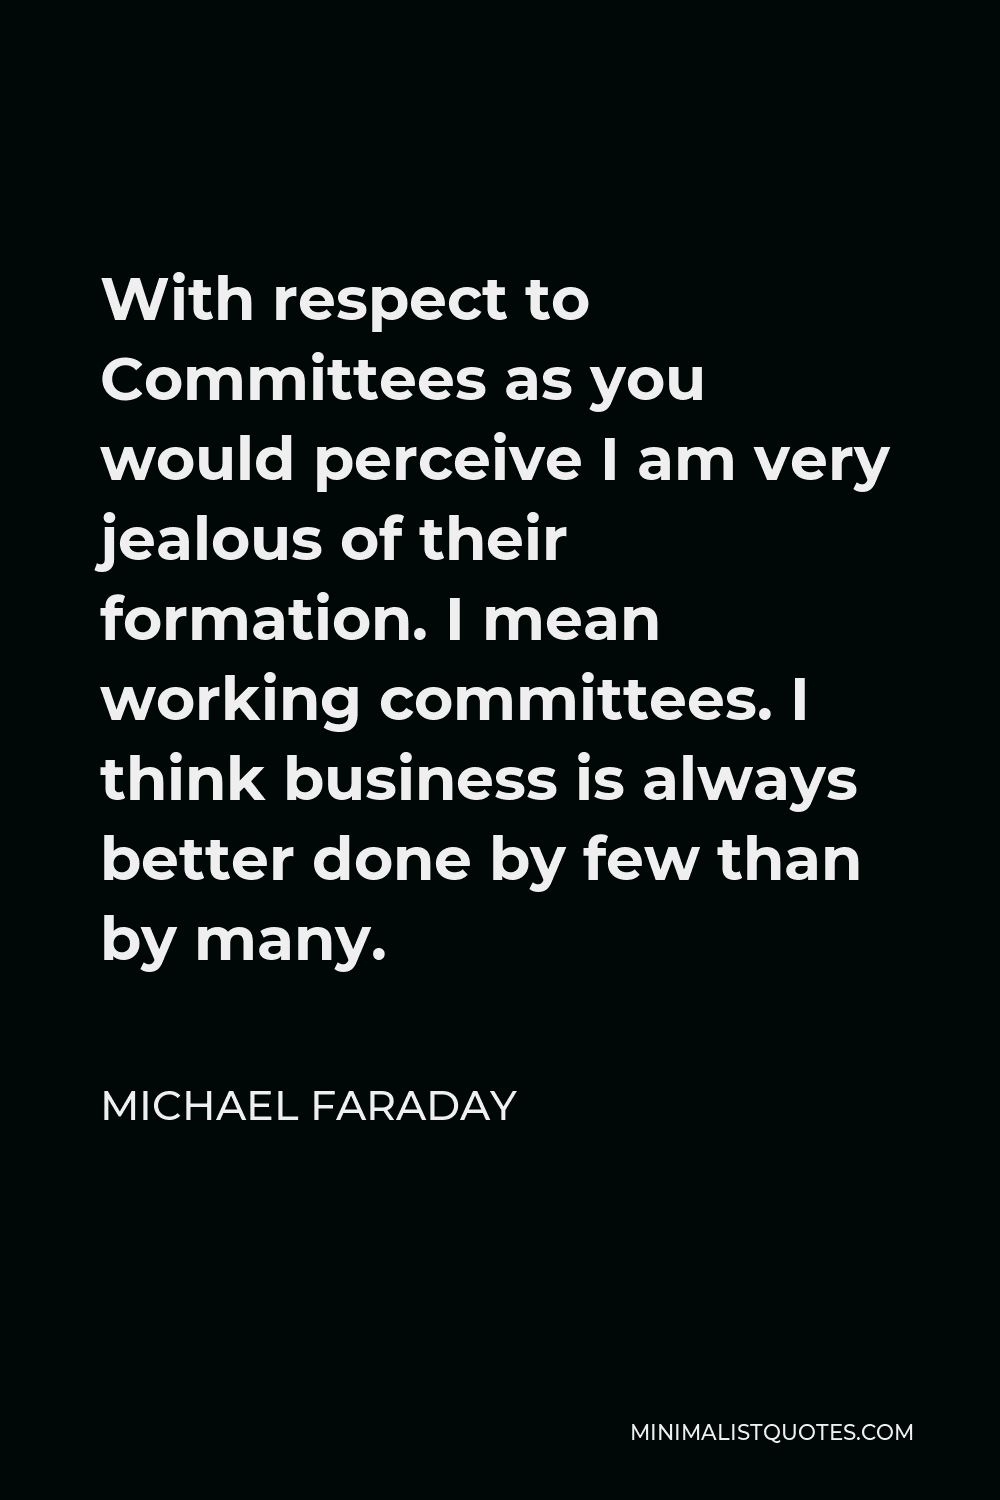 Michael Faraday Quote - With respect to Committees as you would perceive I am very jealous of their formation. I mean working committees. I think business is always better done by few than by many.